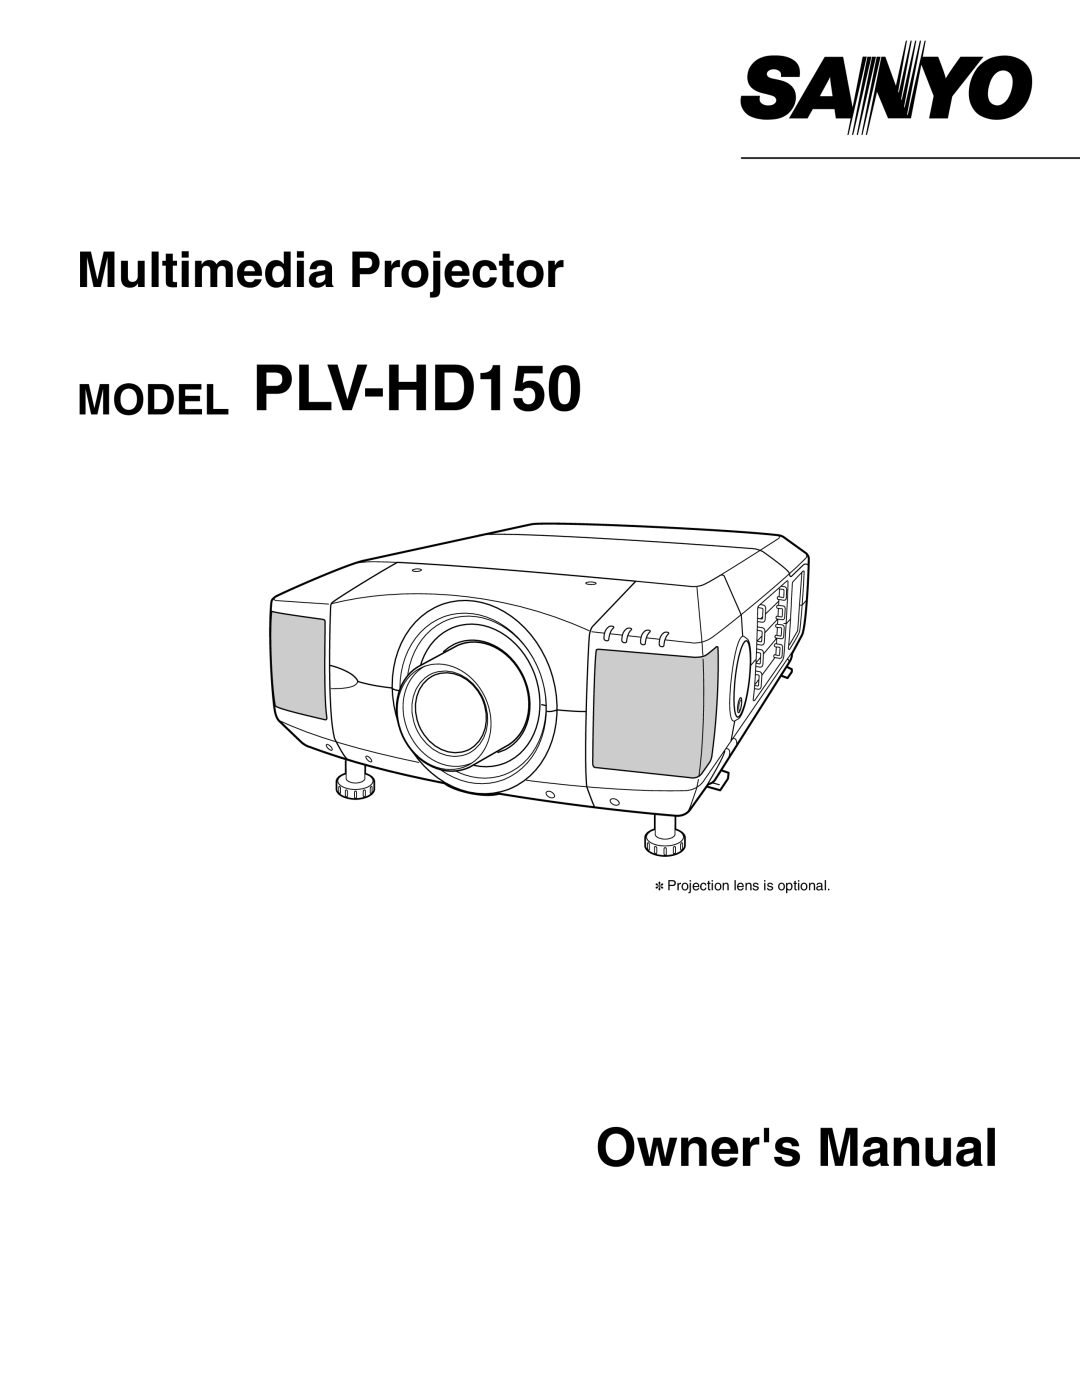 Sanyo owner manual MODEL PLV-HD150, Owners Manual, Multimedia Projector 